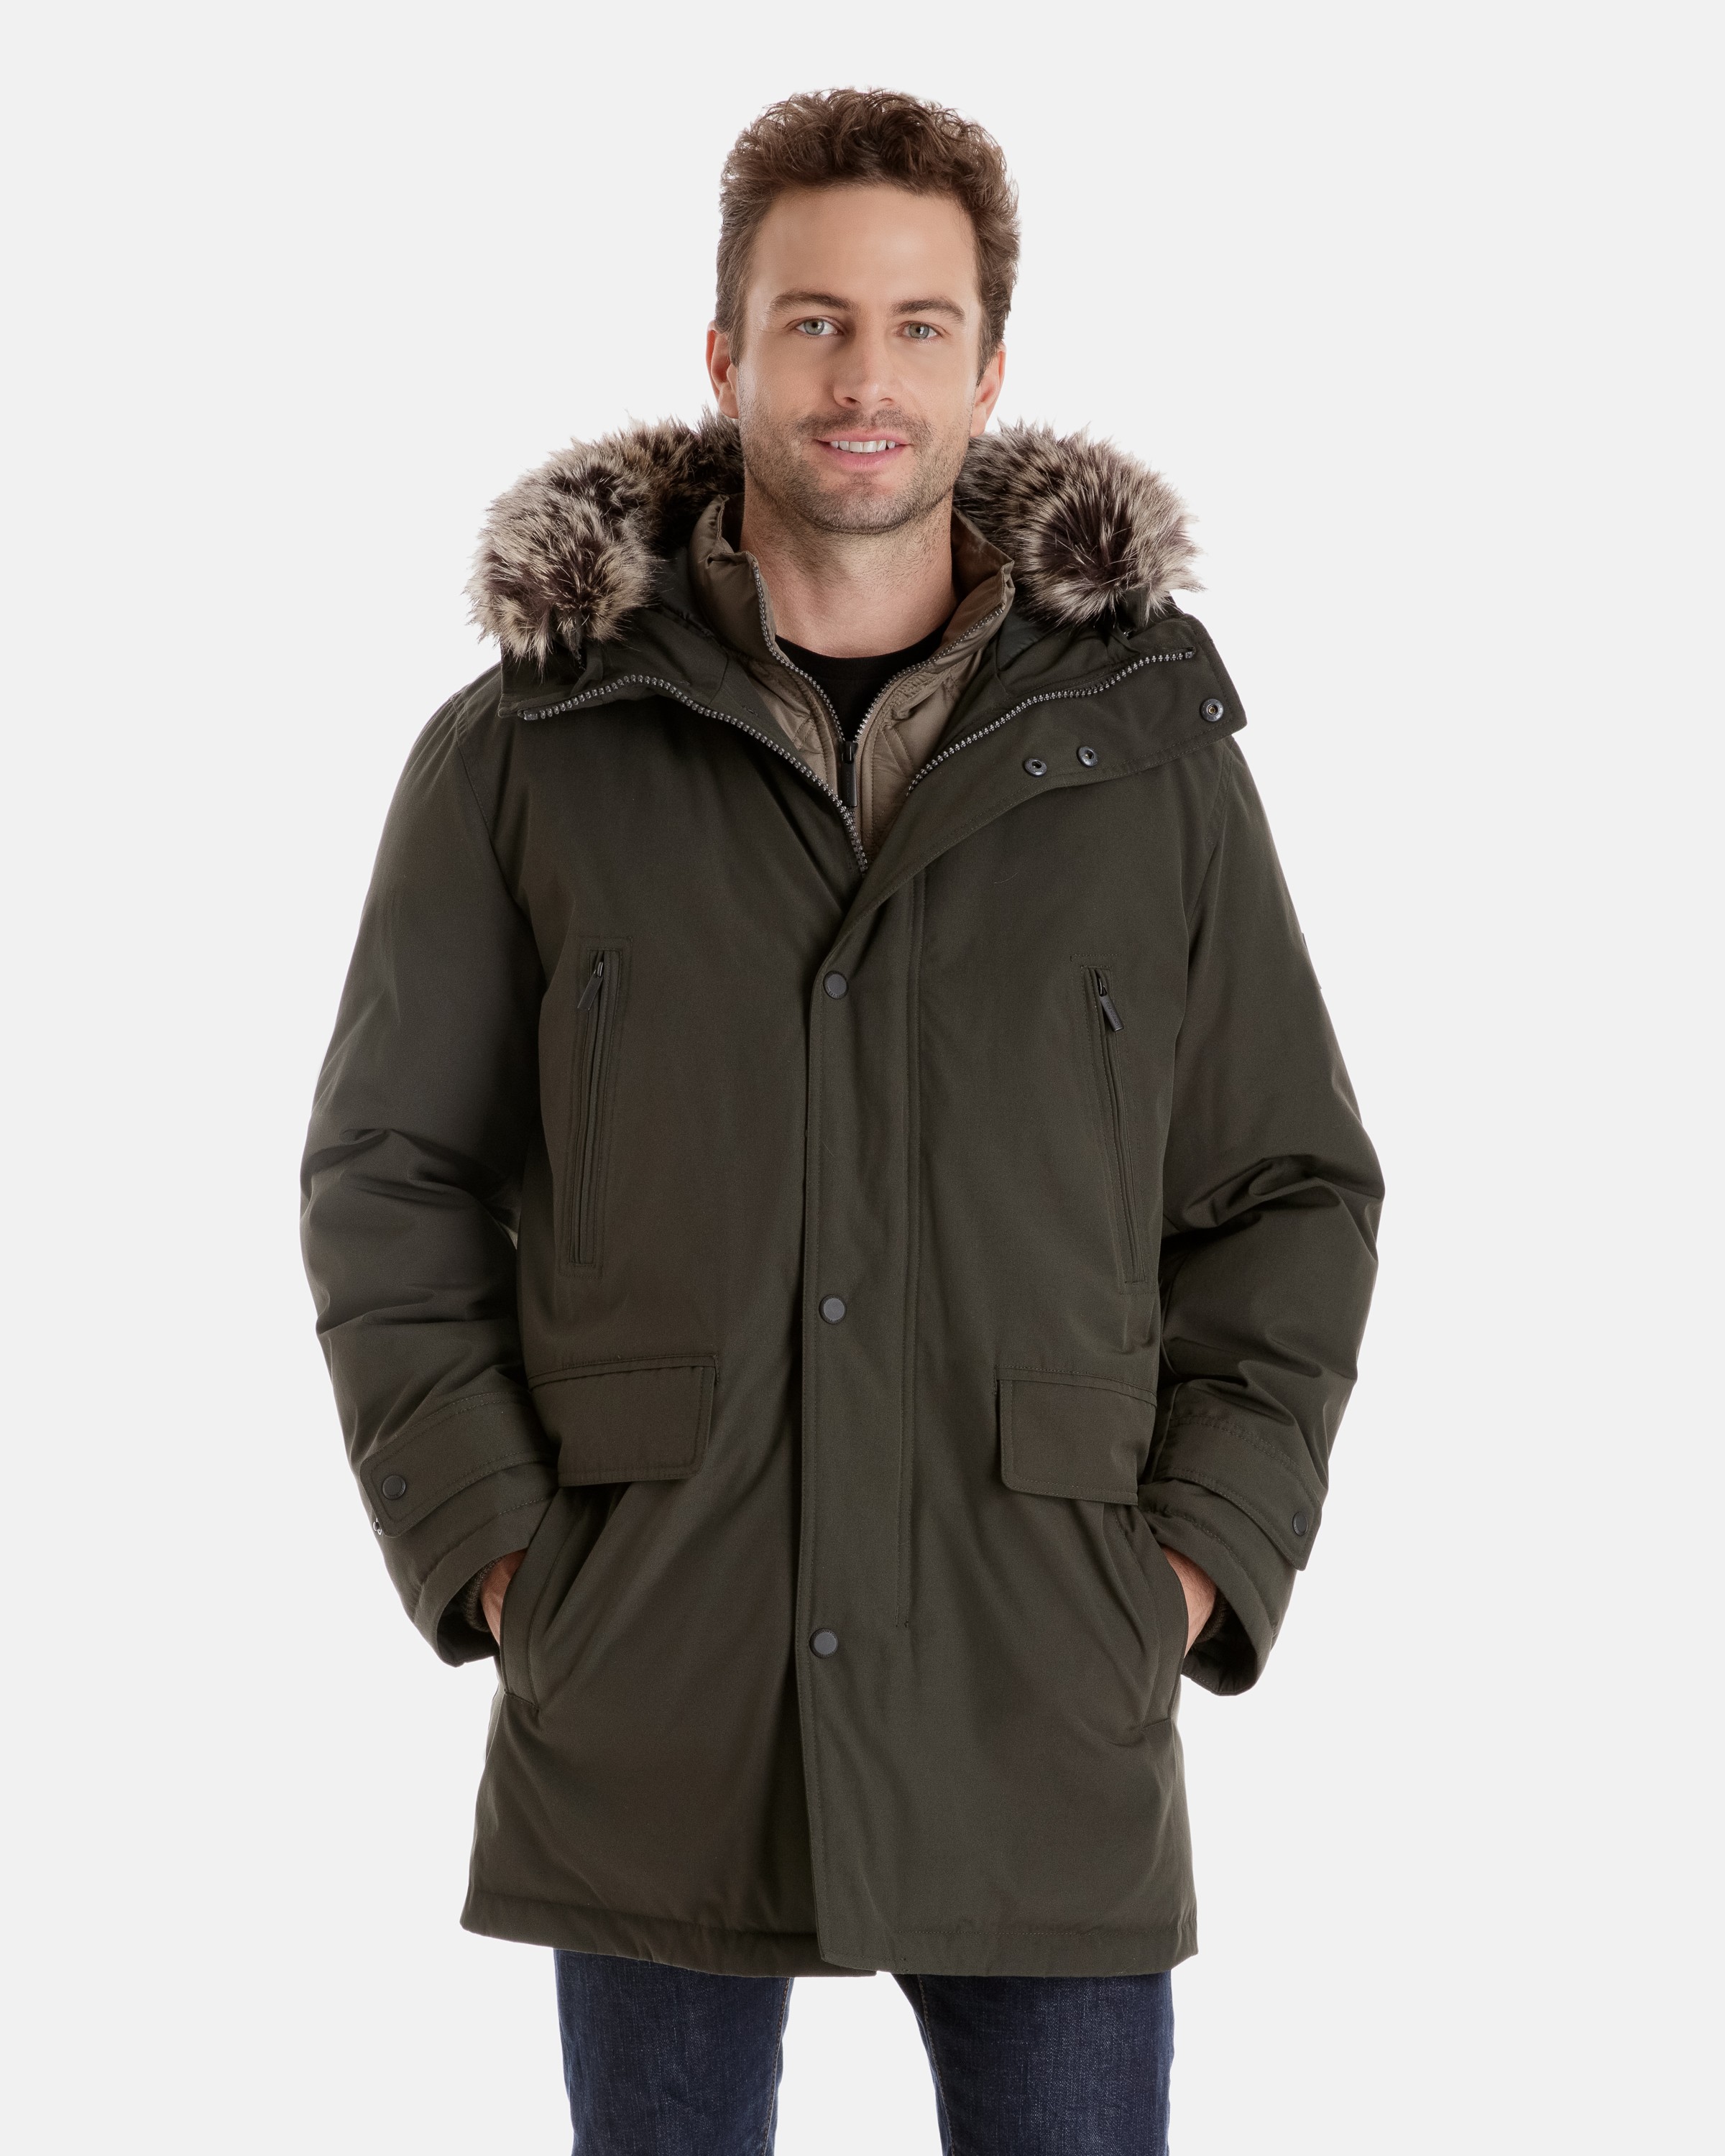 Cover up yourself in cold weather by wearing mens parkas